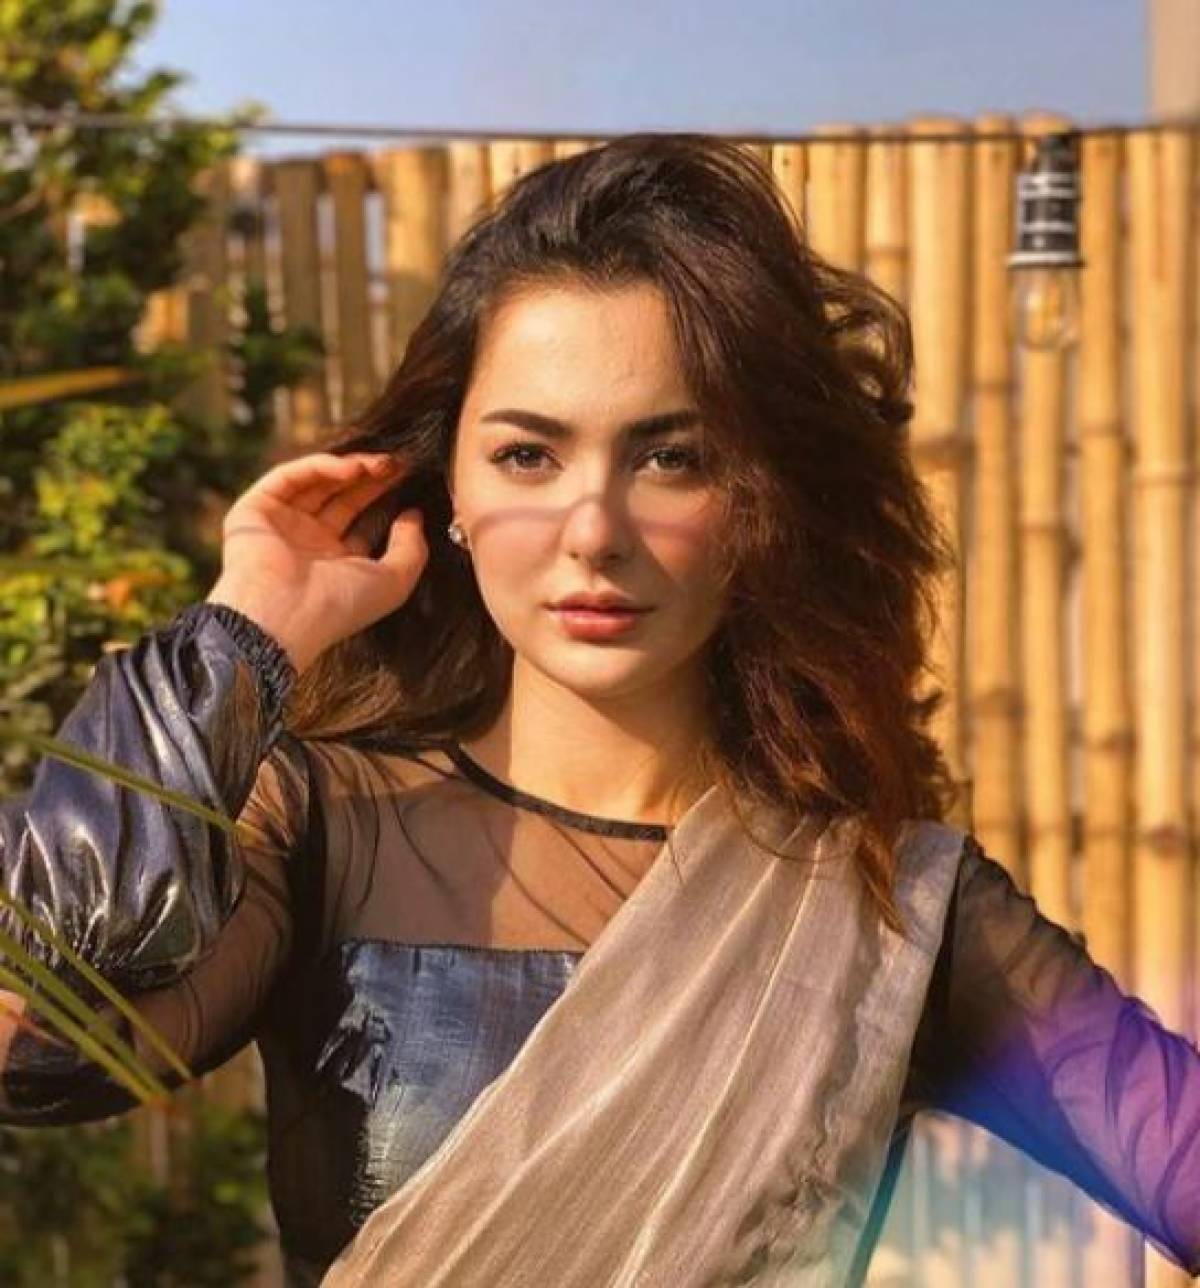 The most talented, entertaining, and prettiest actress Hania Aamir opens up about her relationship with her father. While everyone was celebrating Mothers' Day with lovely posts on social media, Hania had to draw attention towards another aspect. Want to know what did she reveal in her video message on Instagram? Check out the details below!  Hania Aamir Speaks Up about her Differences with Father!   This Mothers' Day, while the majority of celebs marked the occasion with love and heartful celebrations, Hania Aamir turned to sympathize with those who may not have the best relationships with their parents.  Taking to Instagram on Sunday, Hania shared a special video wishing her “gorgeous” followers a Happy Mothers' Day. While continuing with her message, she began to open up about her own strained relationship with her father. She said:  “I AM SHARING SOMETHING VERY PERSONAL AND I DON’T KNOW IF I SHOULD BUT HERE GOES…”   She added:  “MY FATHER ALHAMDULILLAH IS ALIVE, WELL AND HEALTHY, BUT WE DON’T STAY CONNECTED.”   “THOSE ARE OUR OWN ISSUES, BUT I DON’T FEEL THE BEST ON FATHER’S DAY AND THAT’S BECAUSE WE DON’T SPEAK TO EACH OTHER.”  Hania Aamir further said while she was almost going to break into tears:  “I LOVE HIM, I CAN’T EVEN IMAGINE IF HE WASN’T IN THIS WORLD ANYMORE…”  The Anaa star went on to add that in the same way, there are people whose mothers may not be in this world anymore or they might have some personal differences and not talk to each other.  She said:  “I JUST WANTED TO COME HERE AND ACKNOWLEDGE THAT IF YOU’RE GOING THROUGH SOMETHING LIKE THIS, I SEE YOU.”   Hania continued:  “IT’S OKAY… OTHER PEOPLE ARE CELEBRATING AND THAT’S FINE. IF YOU FEEL BAD… LET IT PASS… I JUST LET IT PASS ON FATHER’S DAY. BUT I AM HERE SENDING LOADS OF LOVE, AND THE WARMEST AND MOST MEANINGFUL HUGS YOUR WAY. HANG IN THERE. YOU GOT THIS.”  Watch this video!  So, what do you think about this big revelation from Hania's end? Don't forget to share your valuable feedback with us!